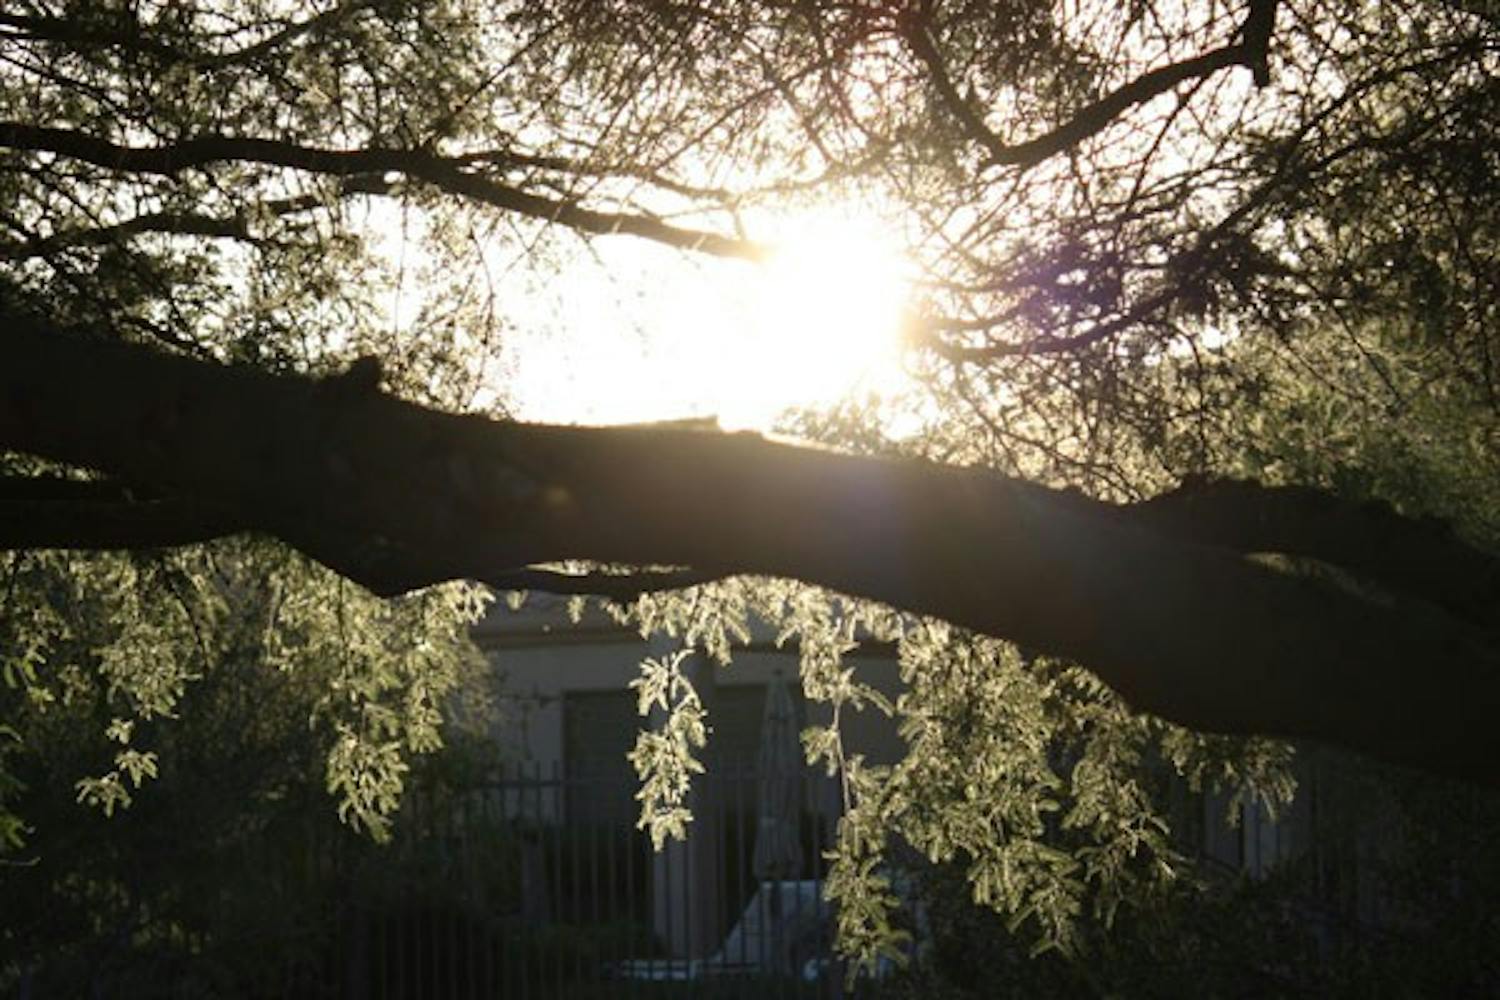 AT DAY'S END: As the sun sets behind a house, the light shines through the leaves hanging from a desert tree. (Photo by Jessica Weisel)